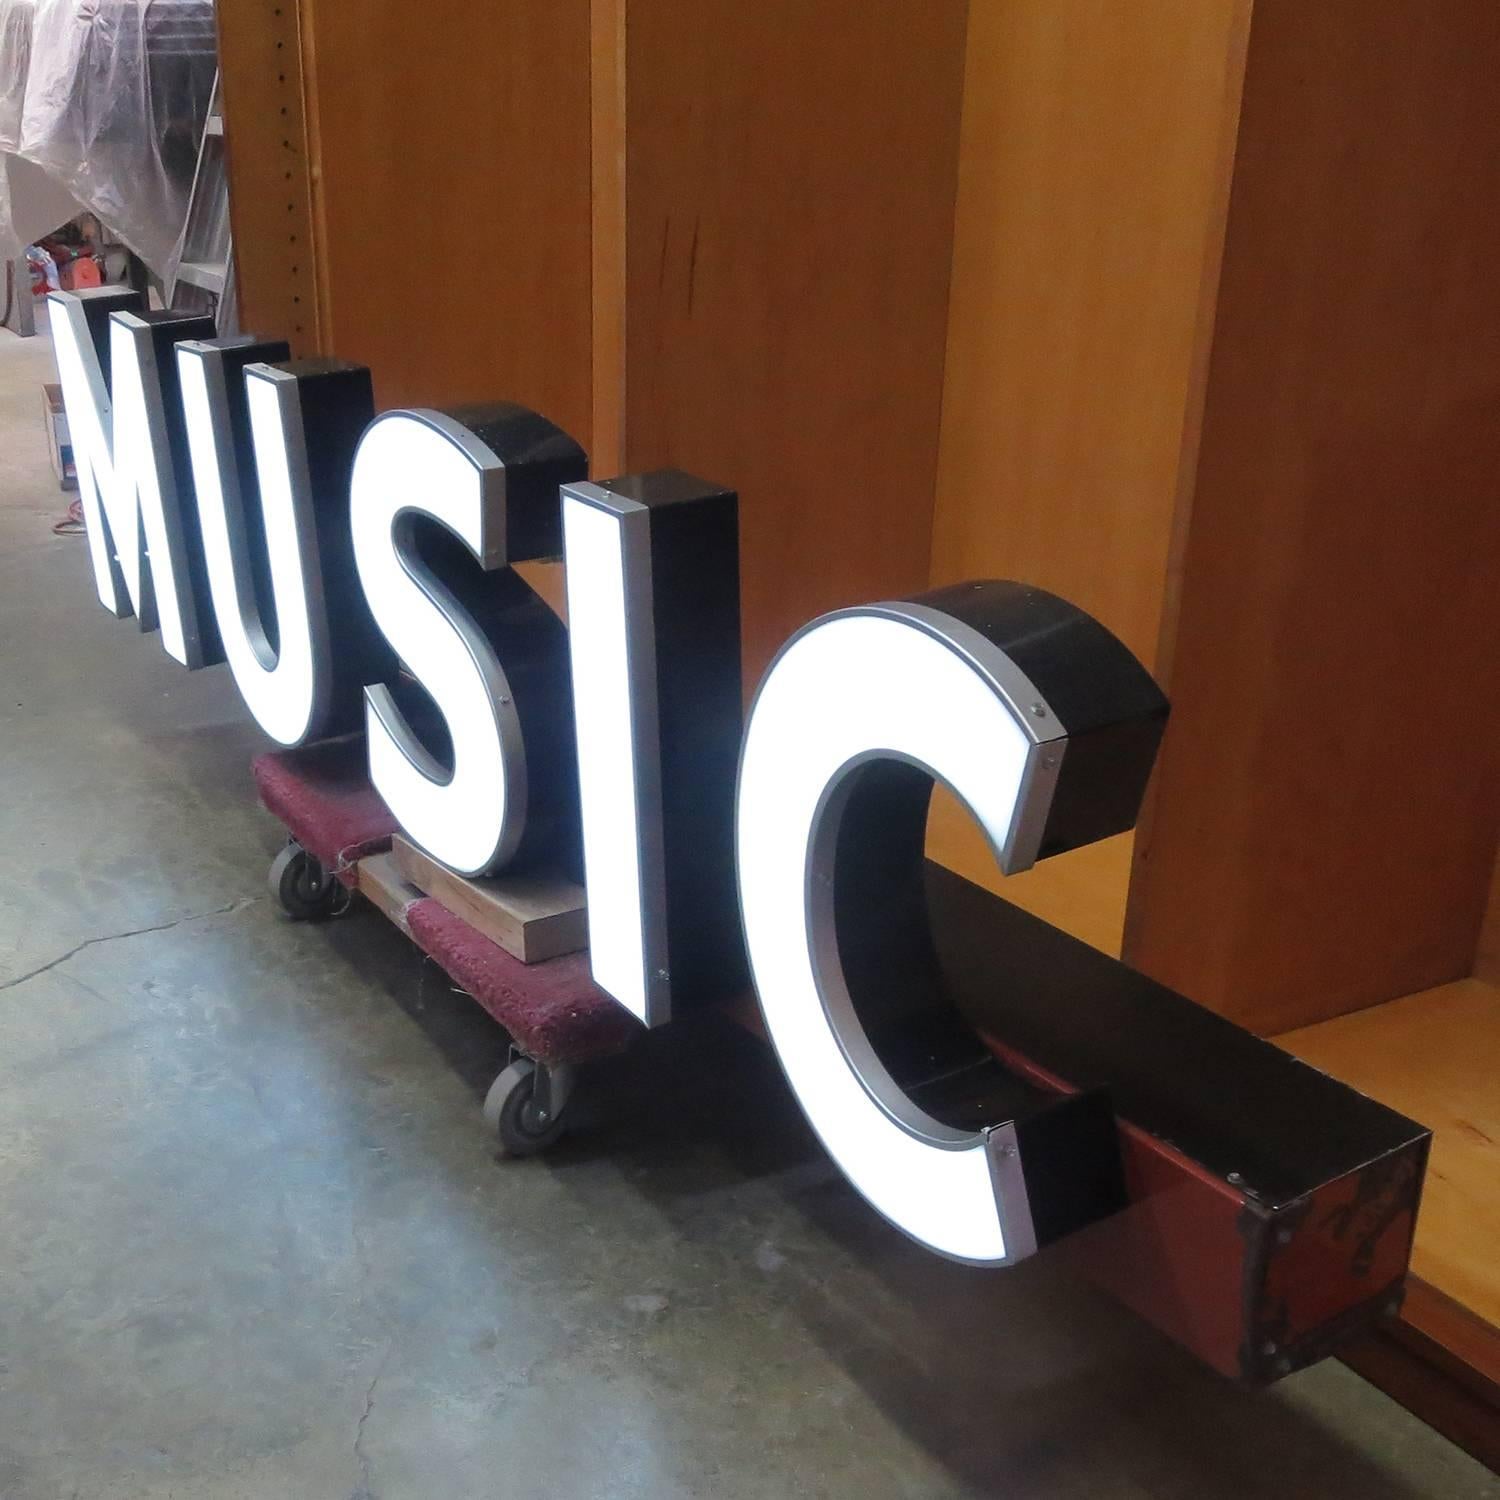 This great neon sign once graced the storefront of a music store in New York. It is impressively scaled at over eight feet in length. The raceway base is porcelain enamel over steel, while the letters are painted steel with acrylic faces over white